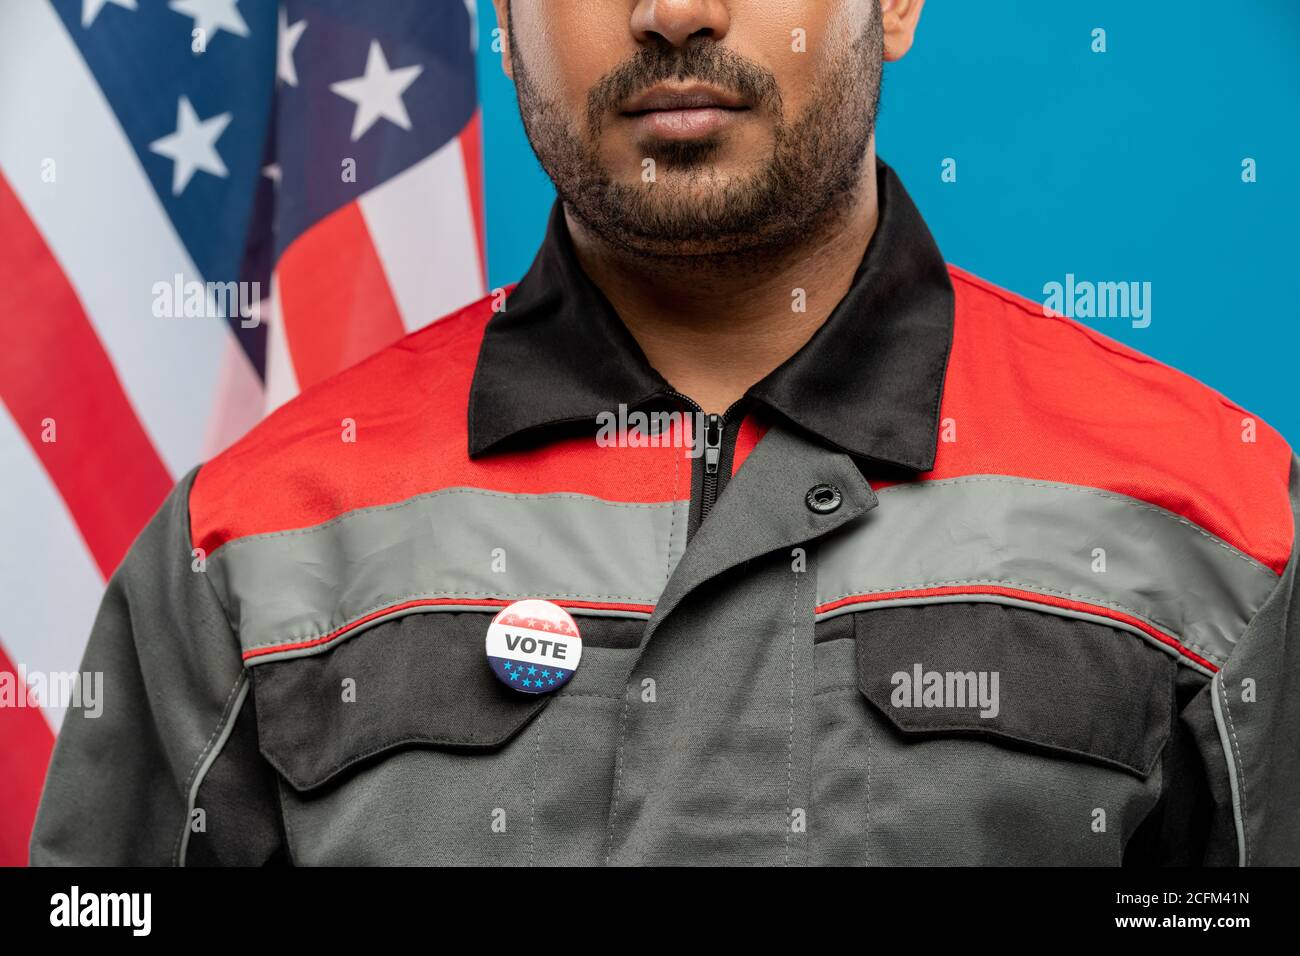 Young serious repairman of Hispanic ethnicity with vote insignia on uniform Stock Photo